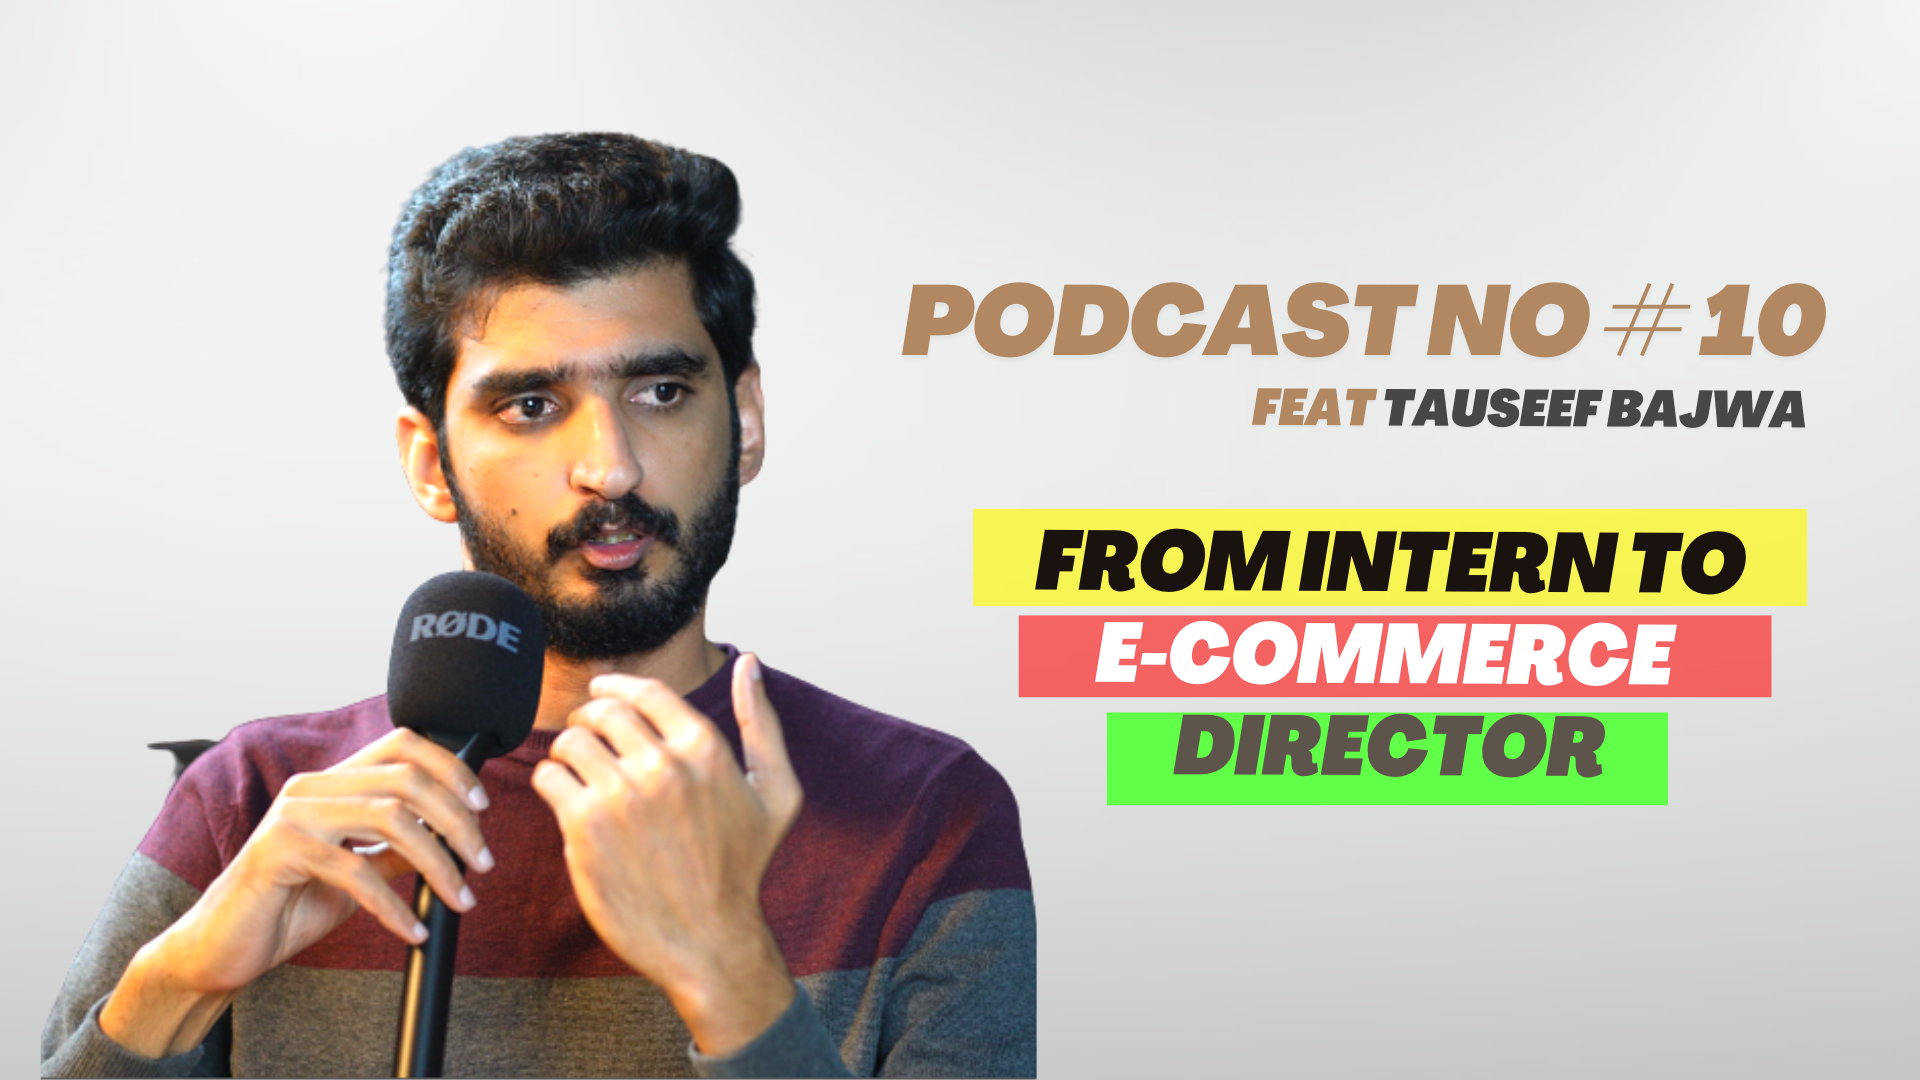 Tauseef Bajwa - Director of Ecommerce Customer Support at Alchmetive